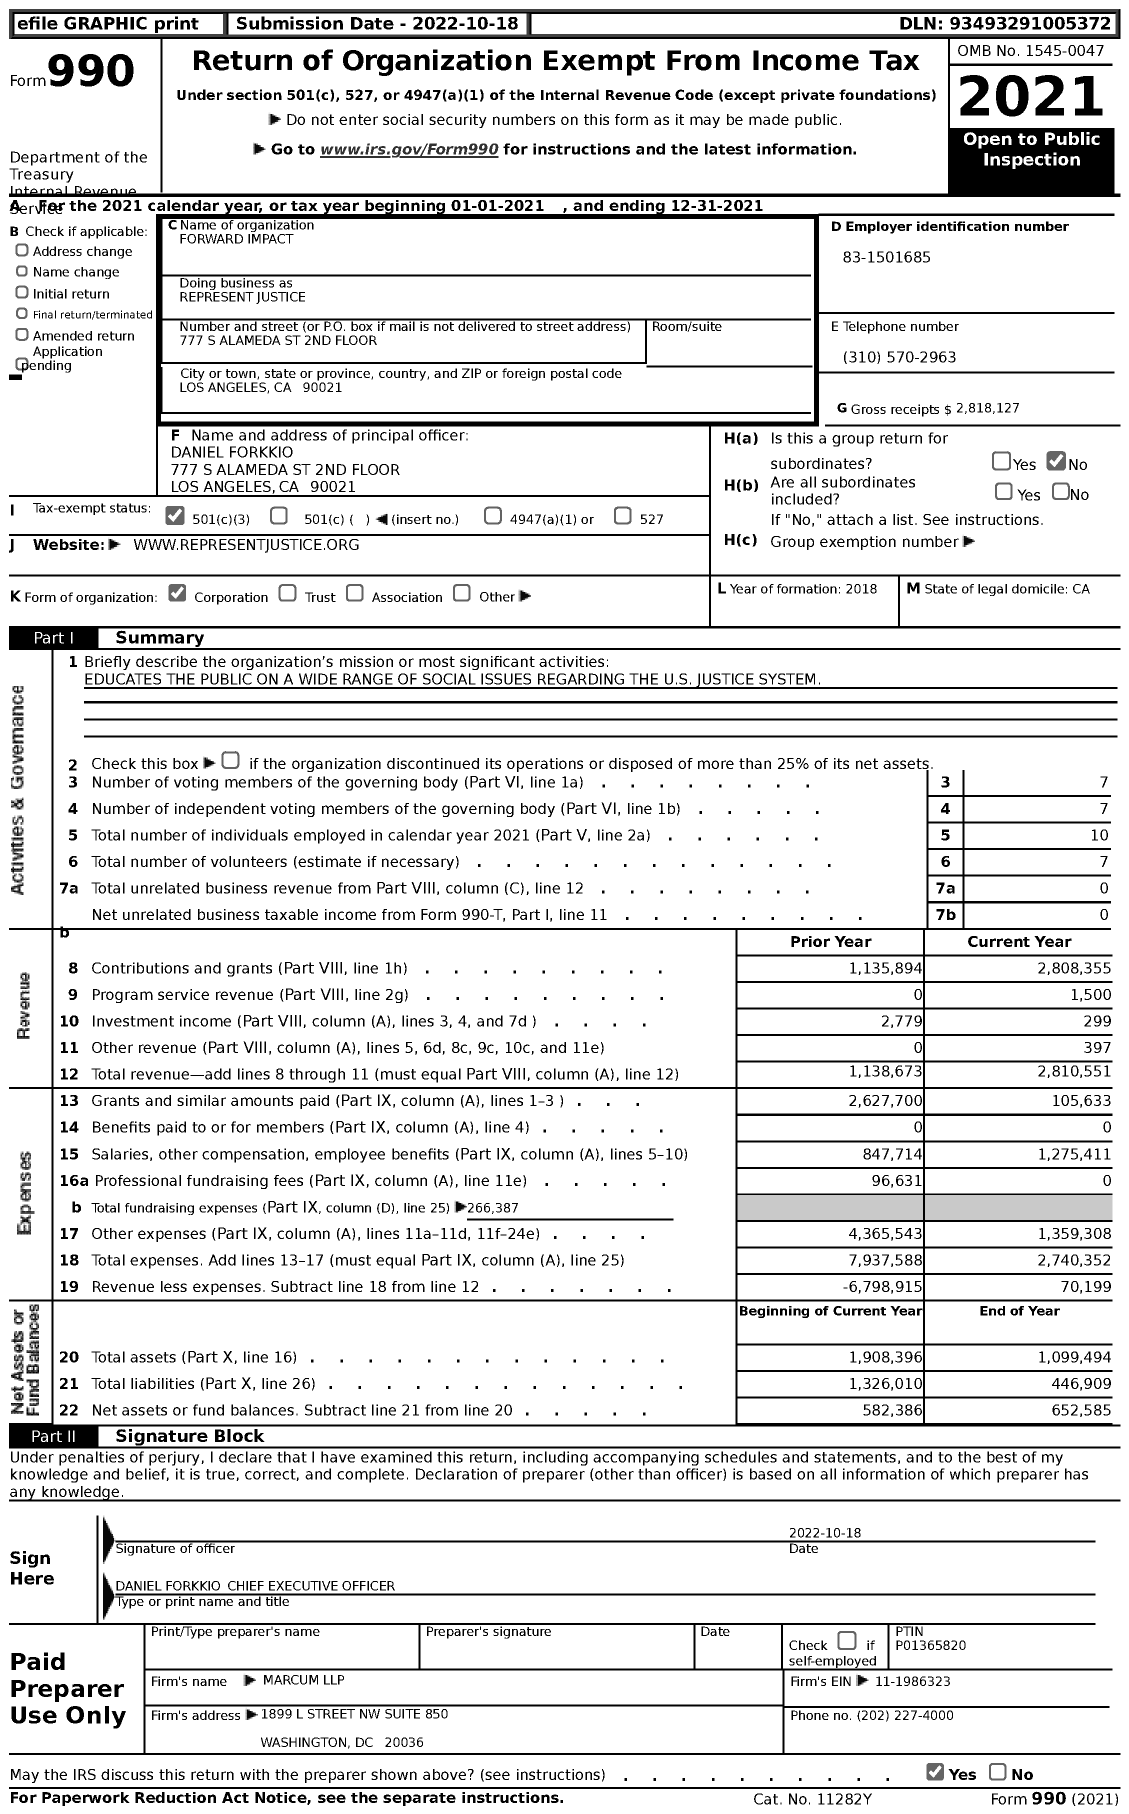 Image of first page of 2021 Form 990 for Represent Justice